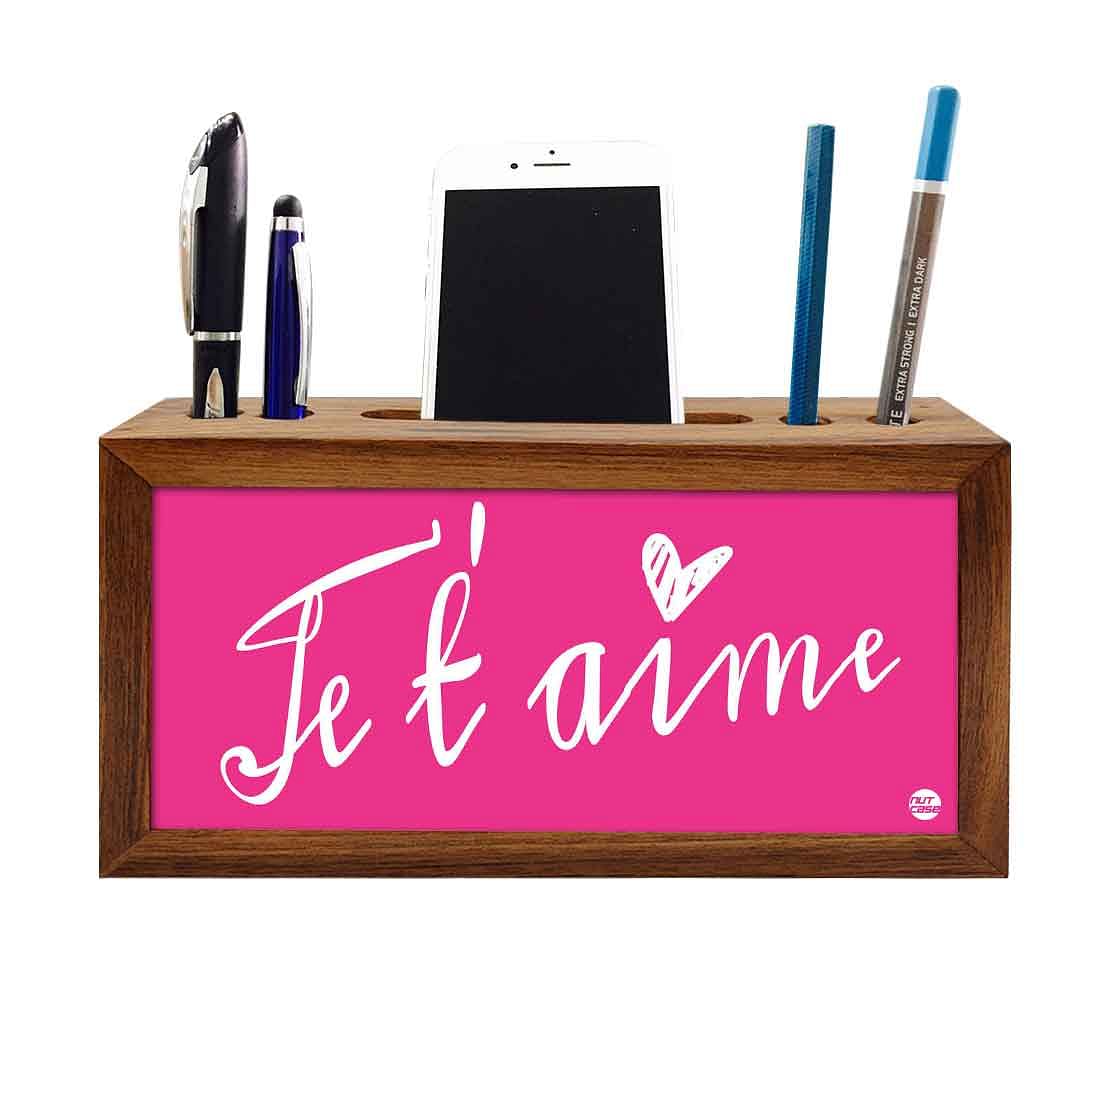 Wooden Phone and Pen Holder Table Organizer for Office - Je t'aime Nutcase